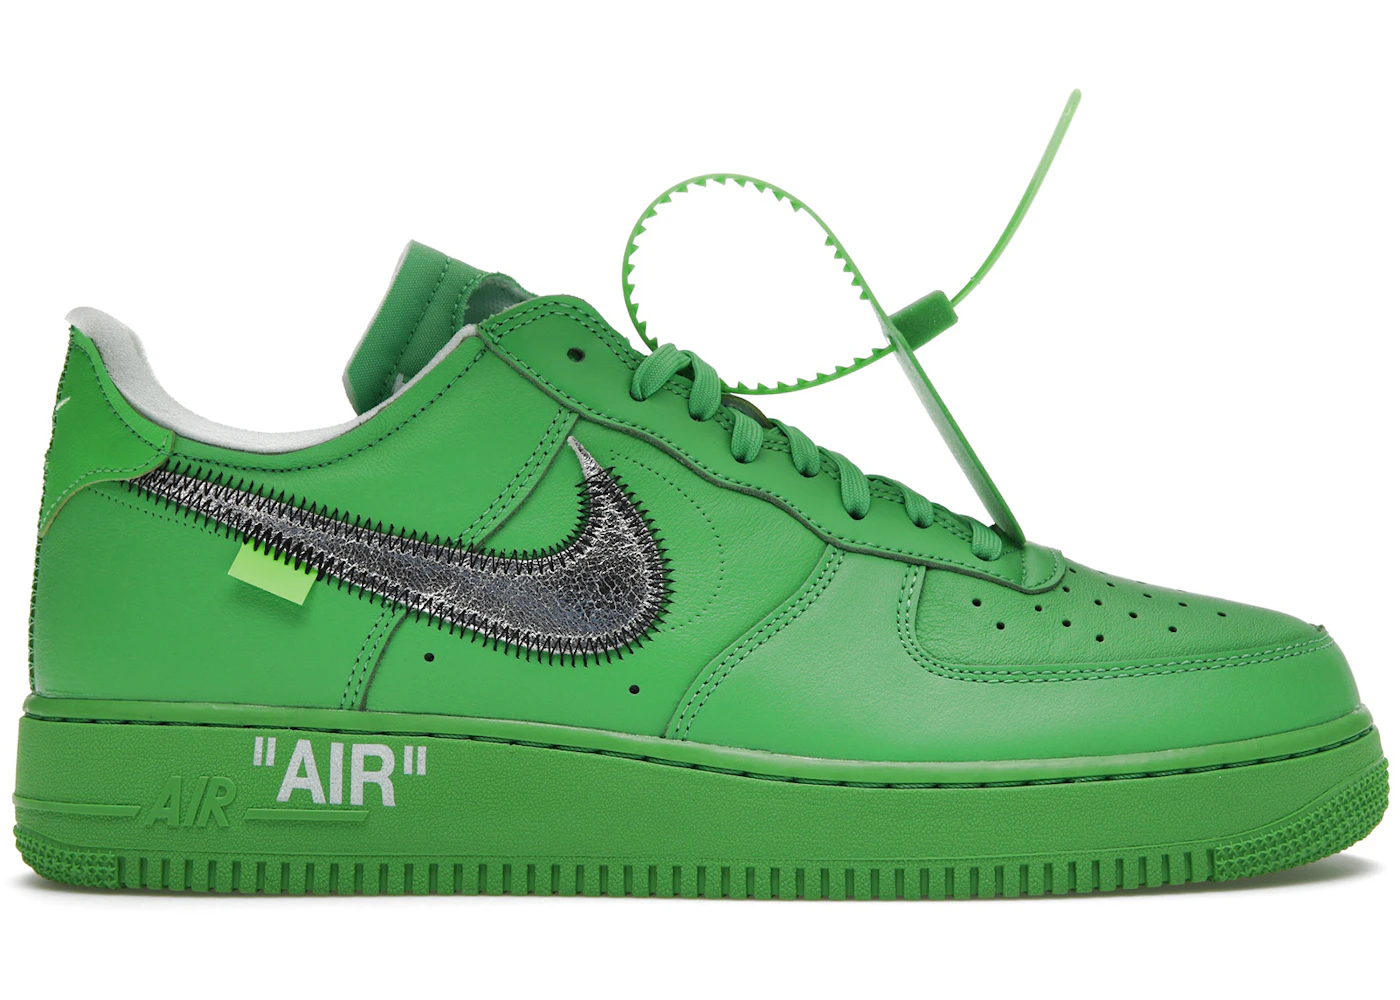 Defective Ten years coat Nike Air Force 1 Low Off-White Brooklyn - DX1419-300 - US